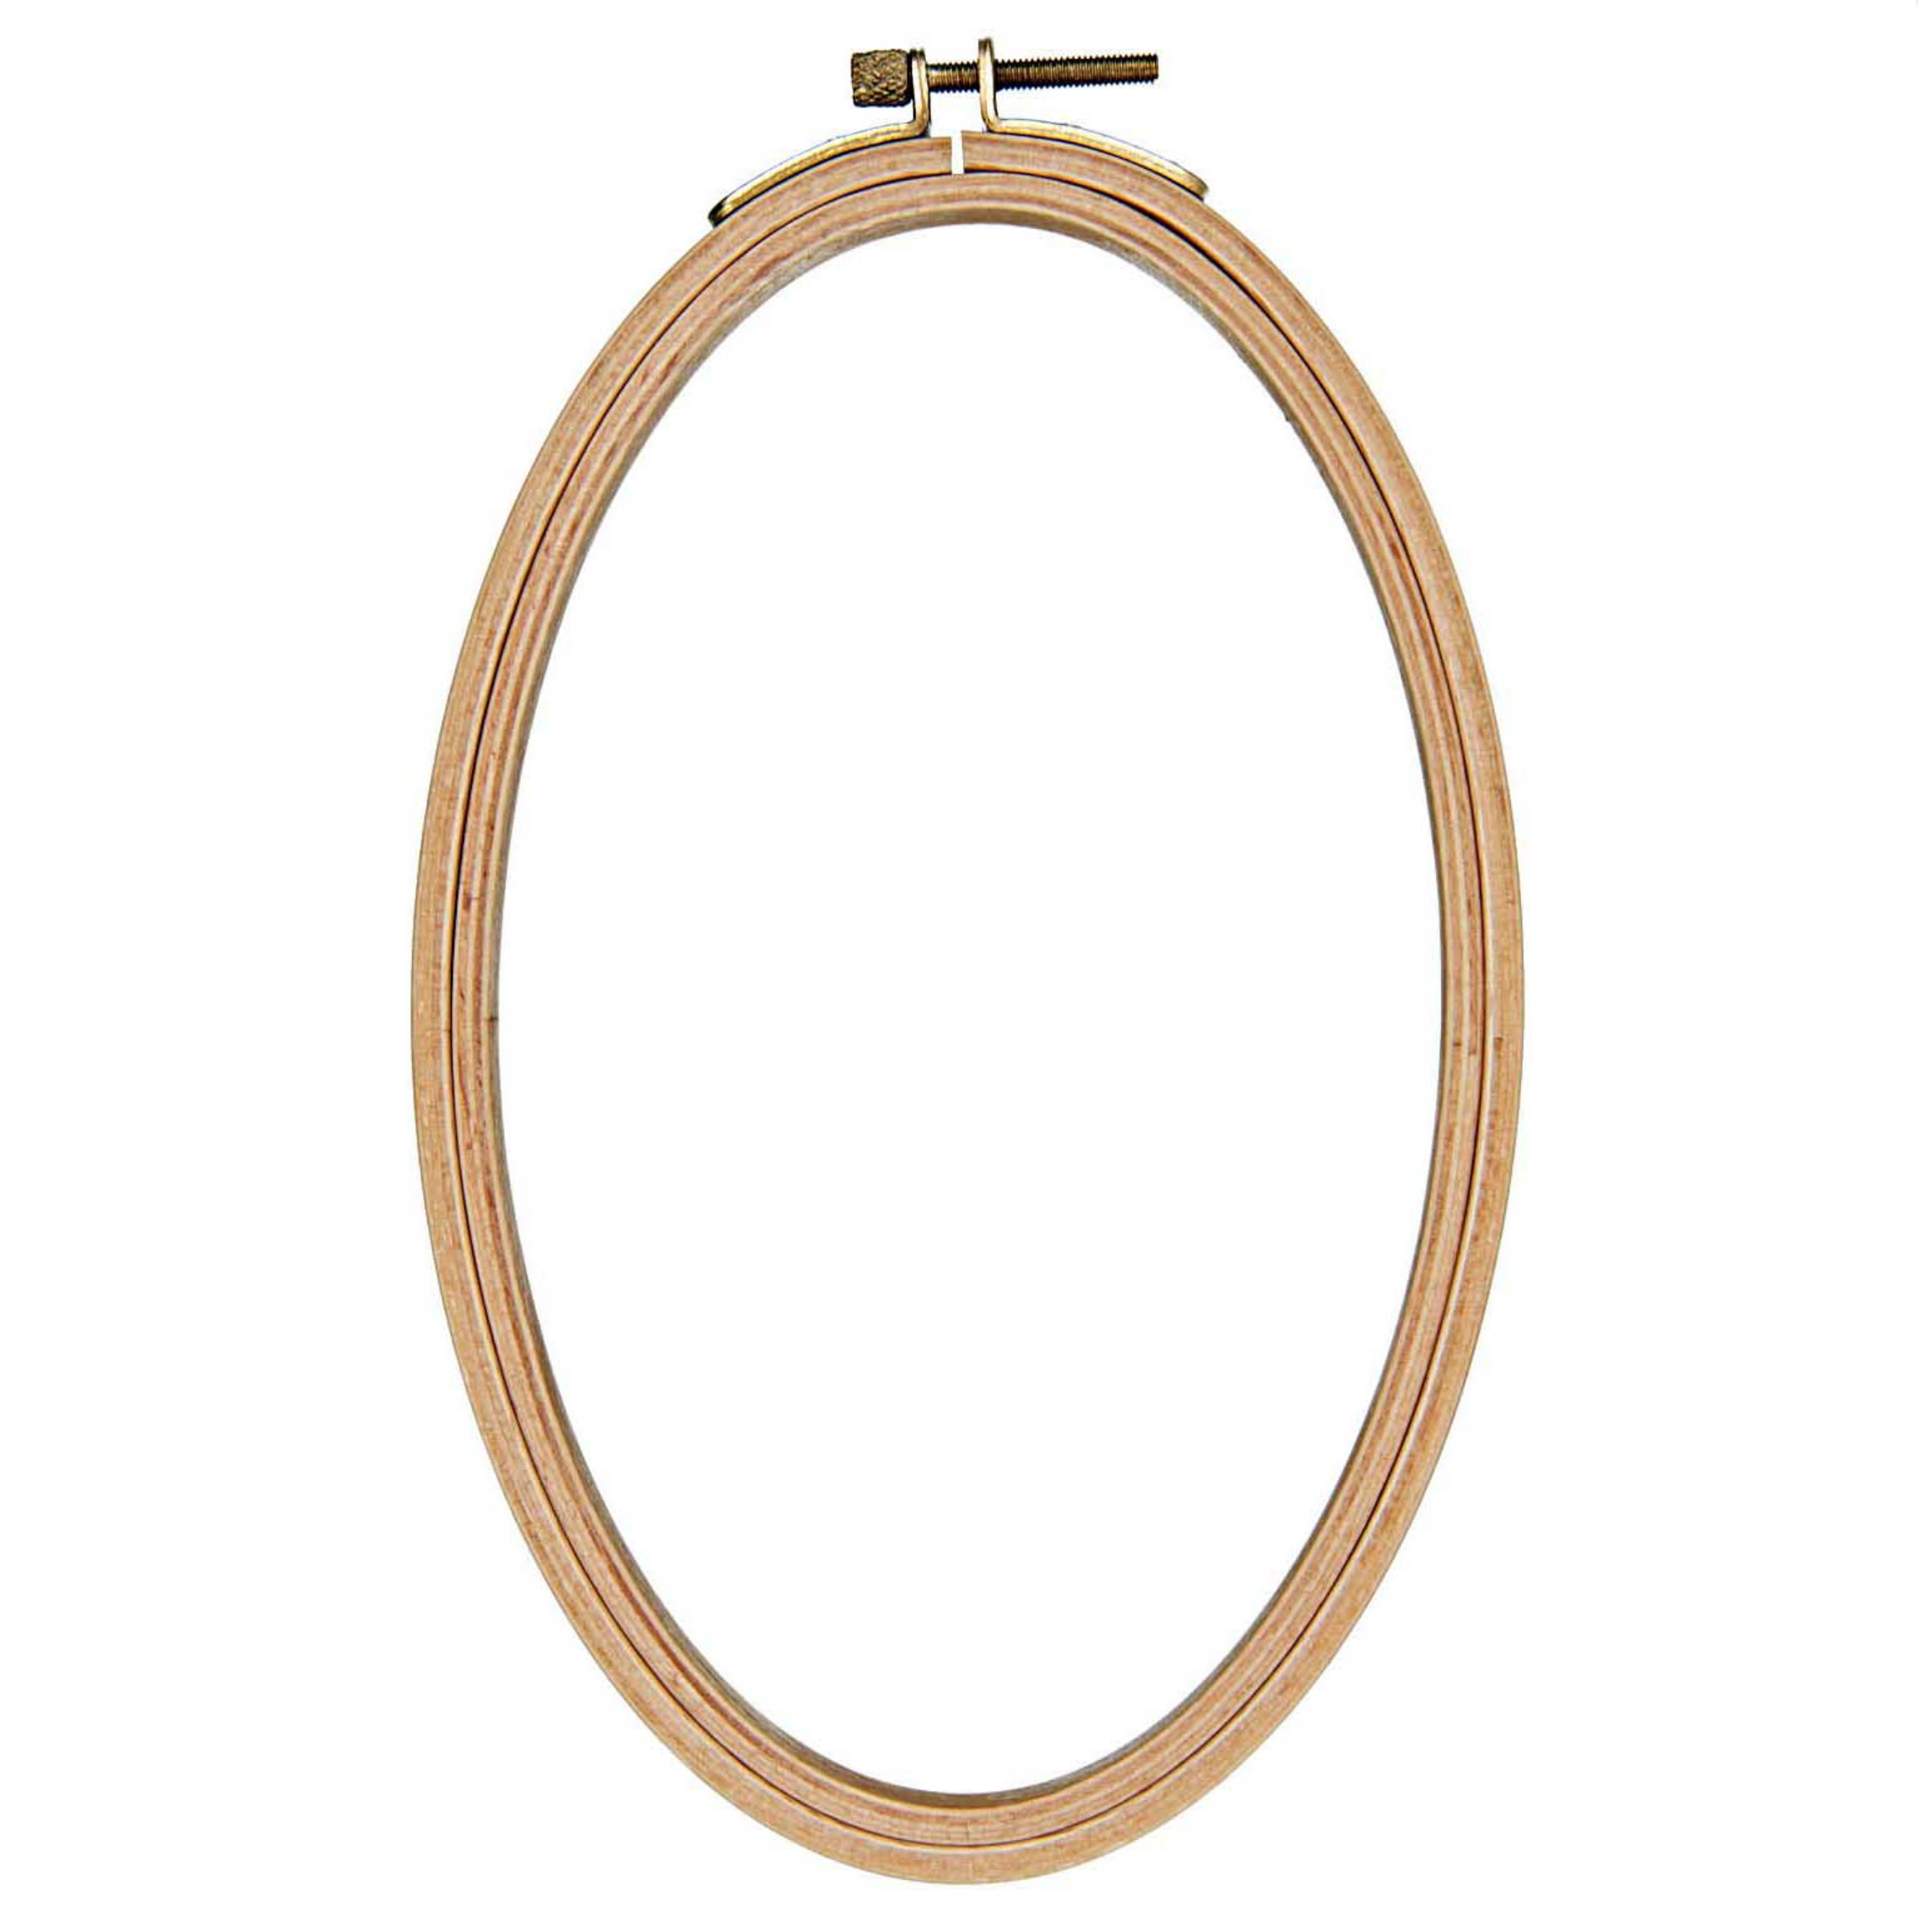 Uxcell 9x6 Wood Color Rubber Oval Embroidery Hoop Frame Cross